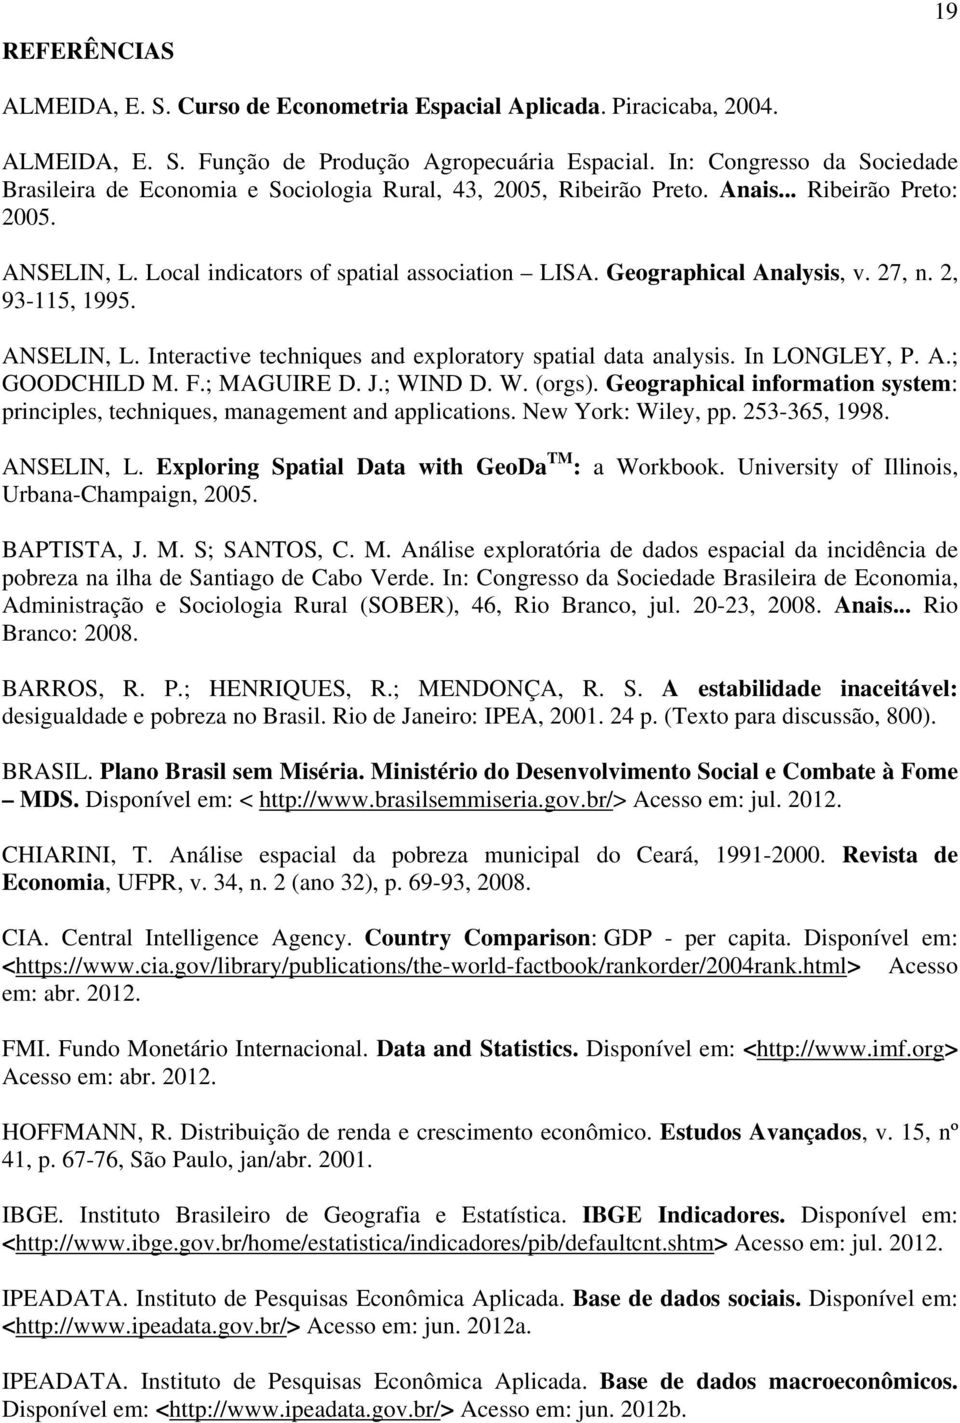 Geographical Analysis, v. 27, n. 2, 93-115, 1995. ANSELIN, L. Interactive techniques and exploratory spatial data analysis. In LONGLEY, P. A.; GOODCHILD M. F.; MAGUIRE D. J.; WIND D. W. (orgs).